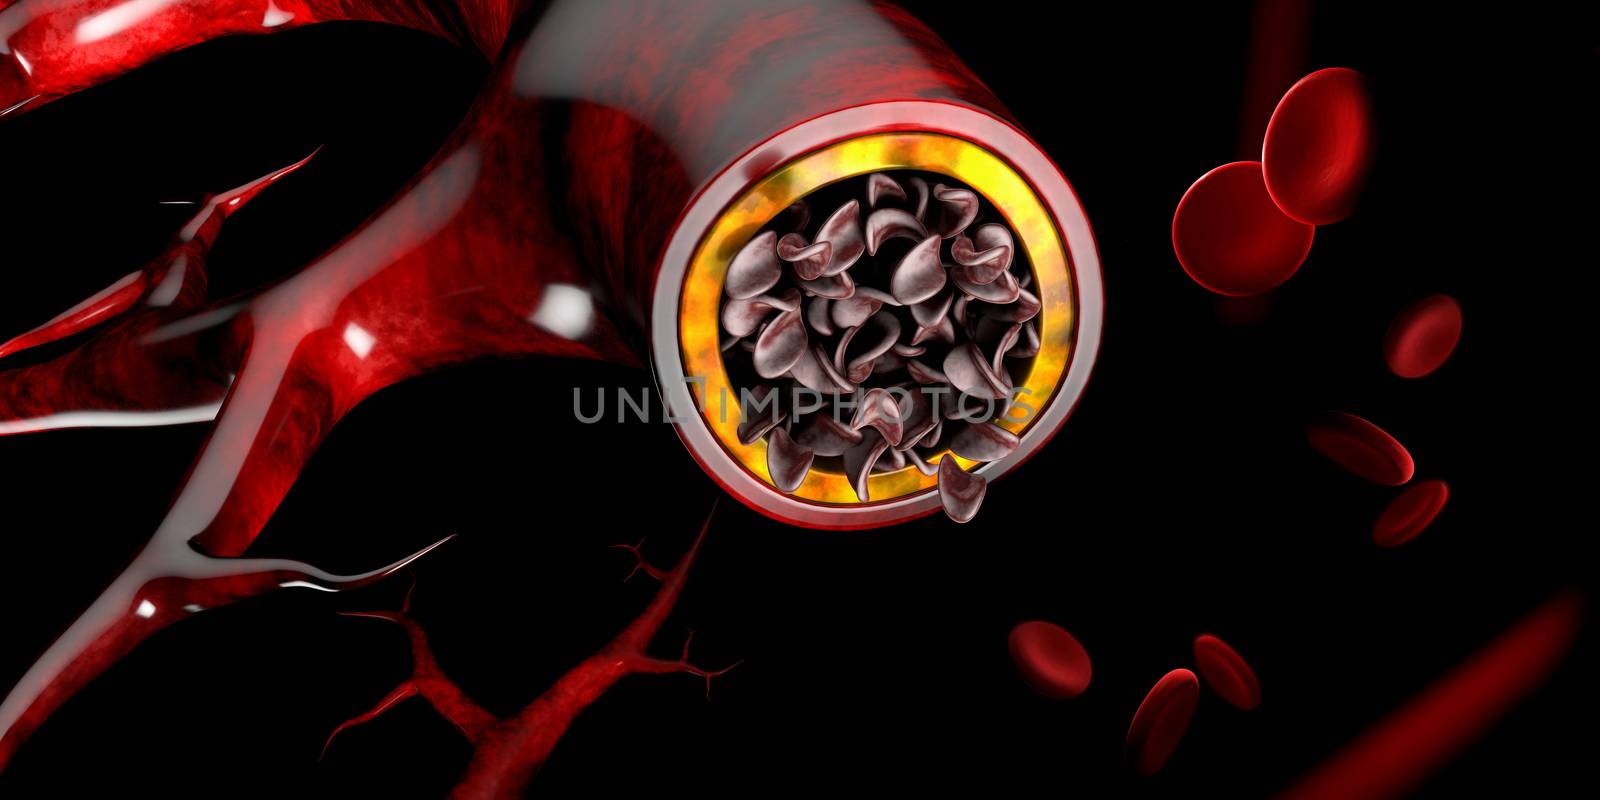 Sickle cell anemia, showing blood vessel with normal and deformated crescent. 3D illustration by tussik